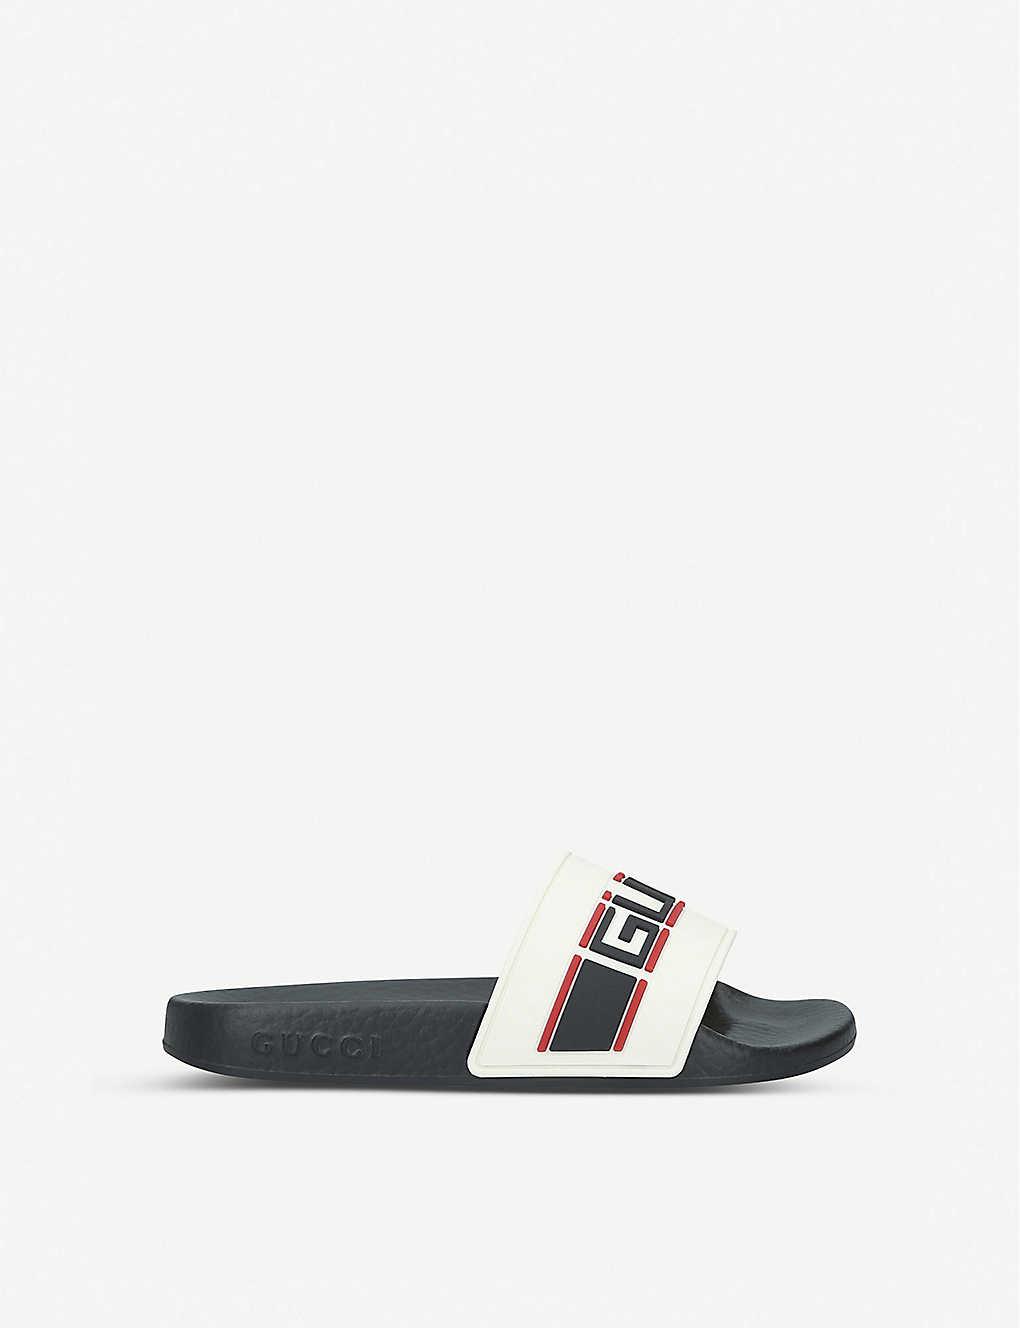 gucci sliders for sale